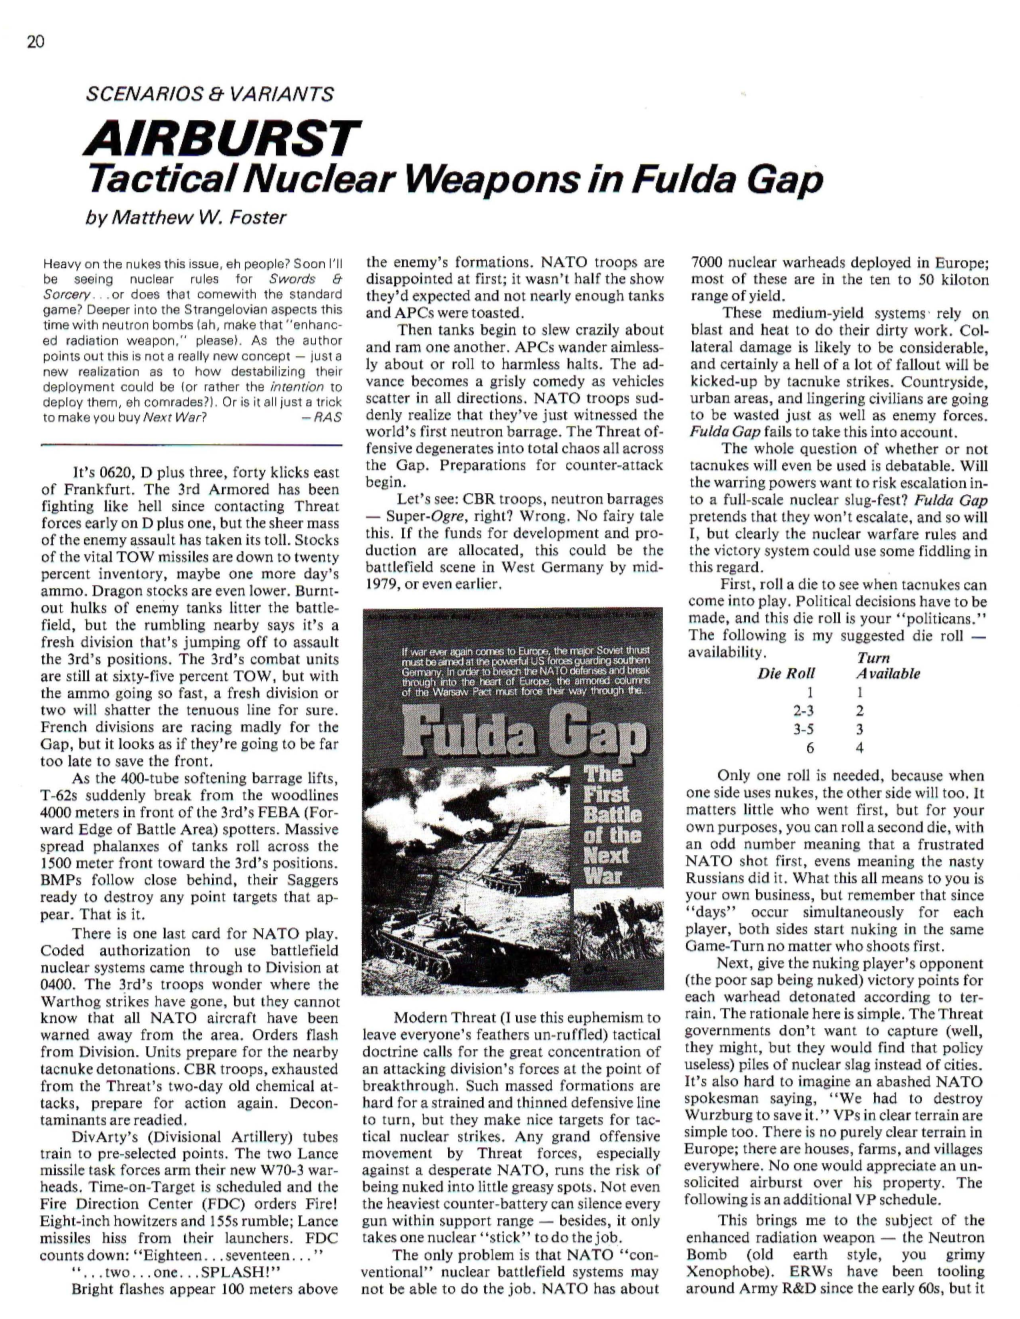 AIRBURST Tactical Nuclear Weapons in Fulda Gap by Matthew W